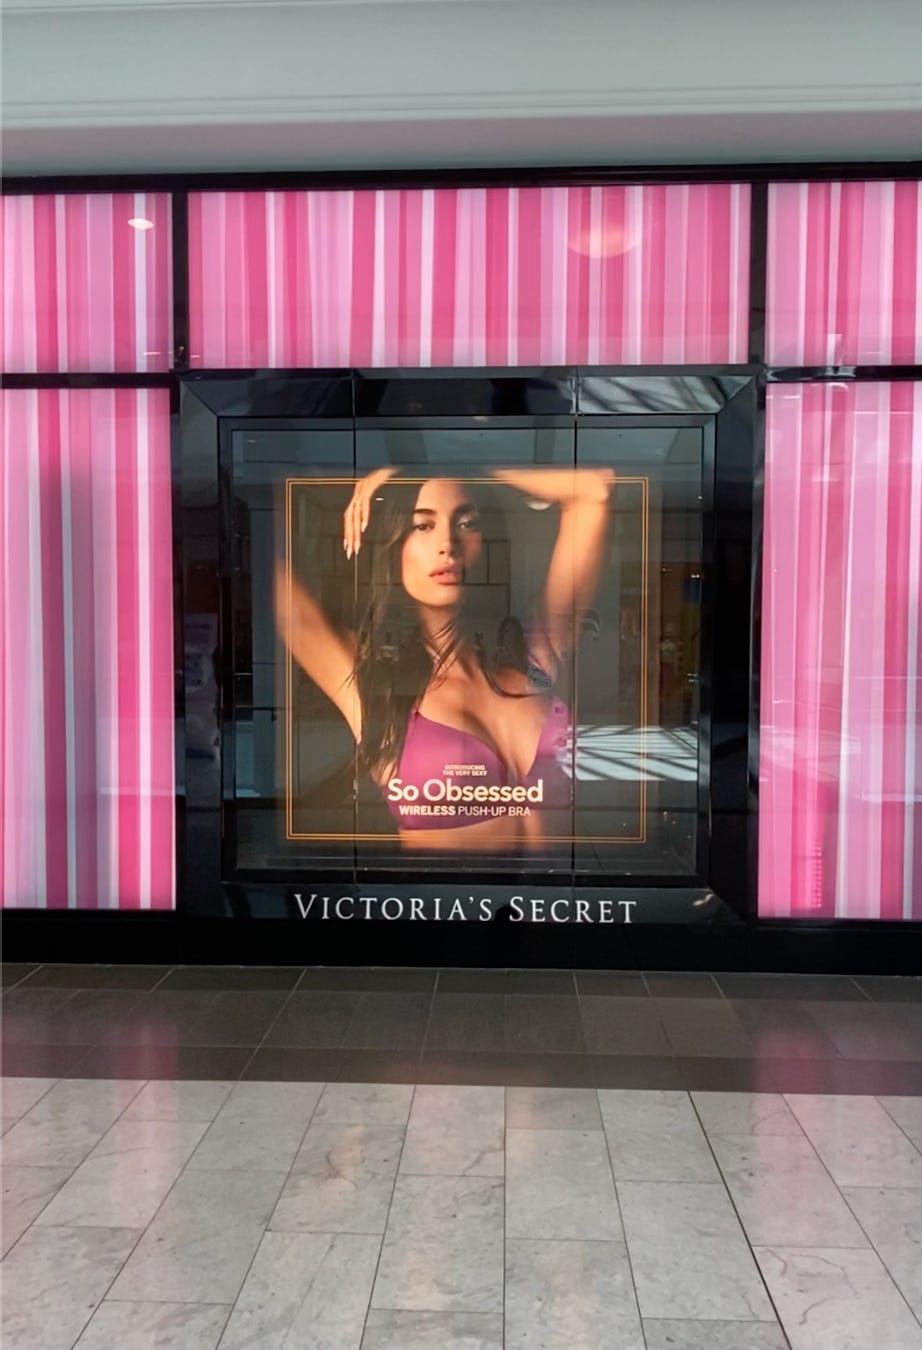 Victoria's Secret has new angels, but will women buy what they're selling?